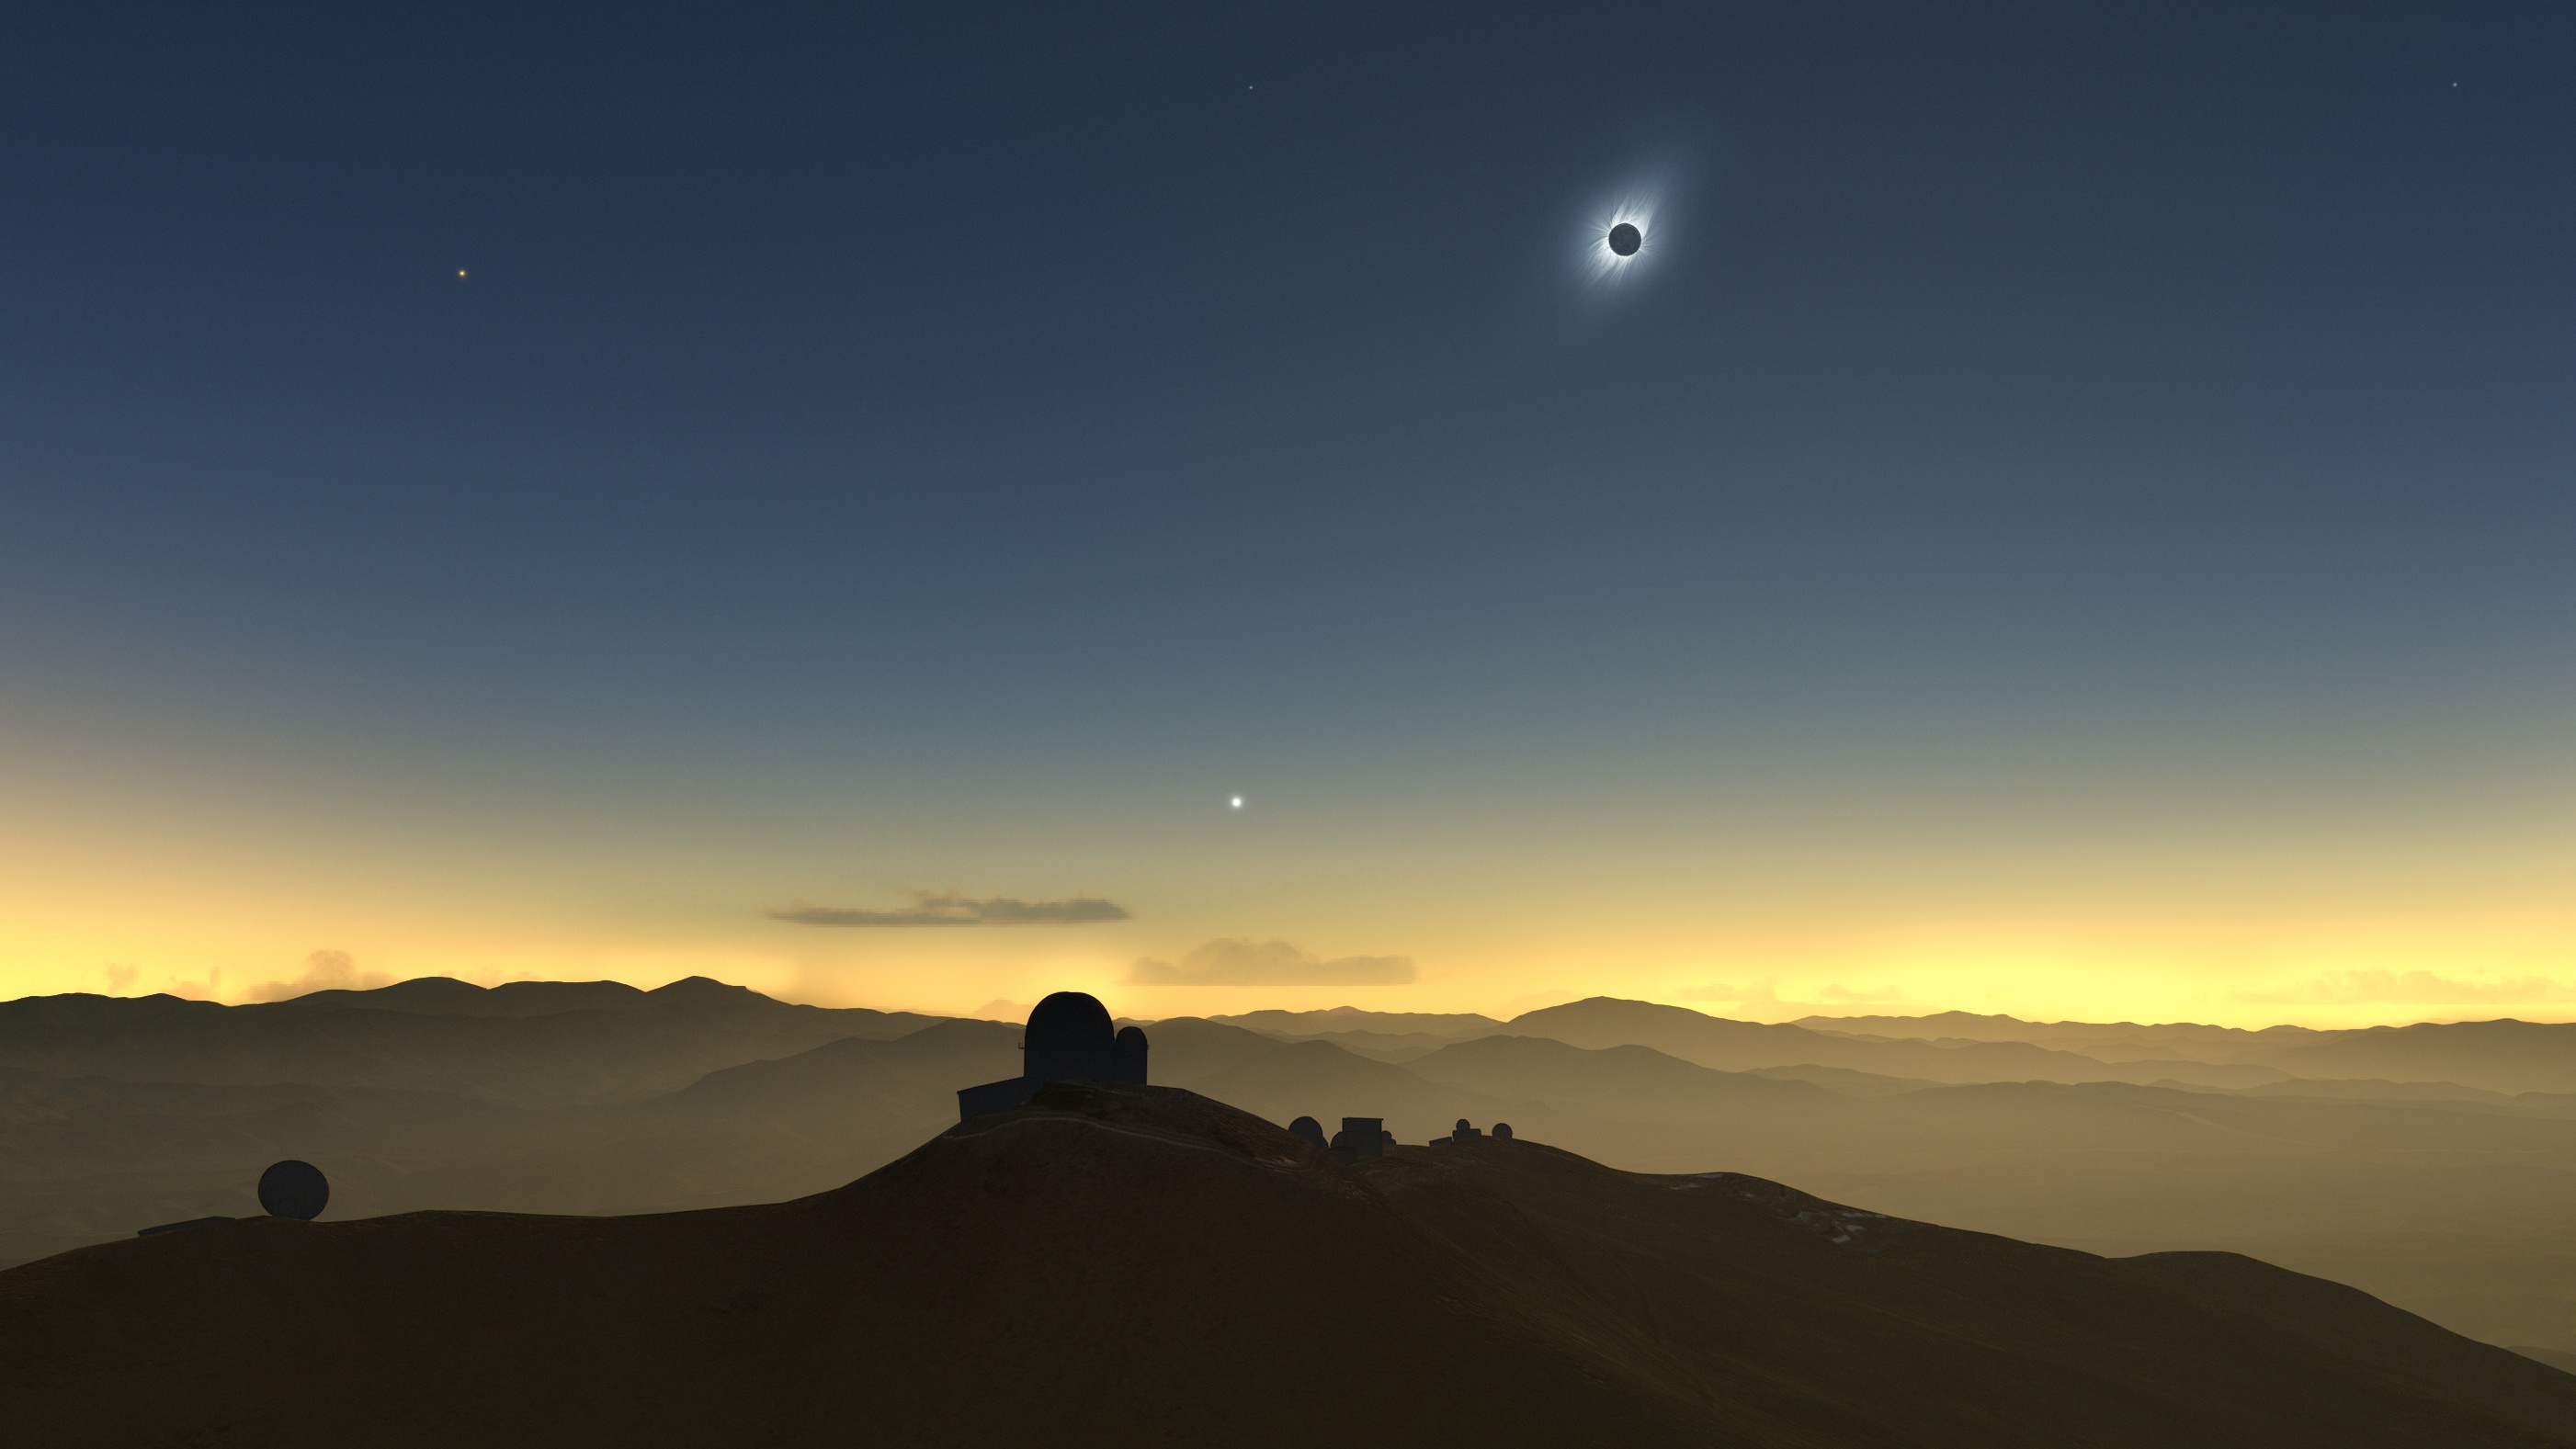 An artist's impression of a solar eclipse in the sky.